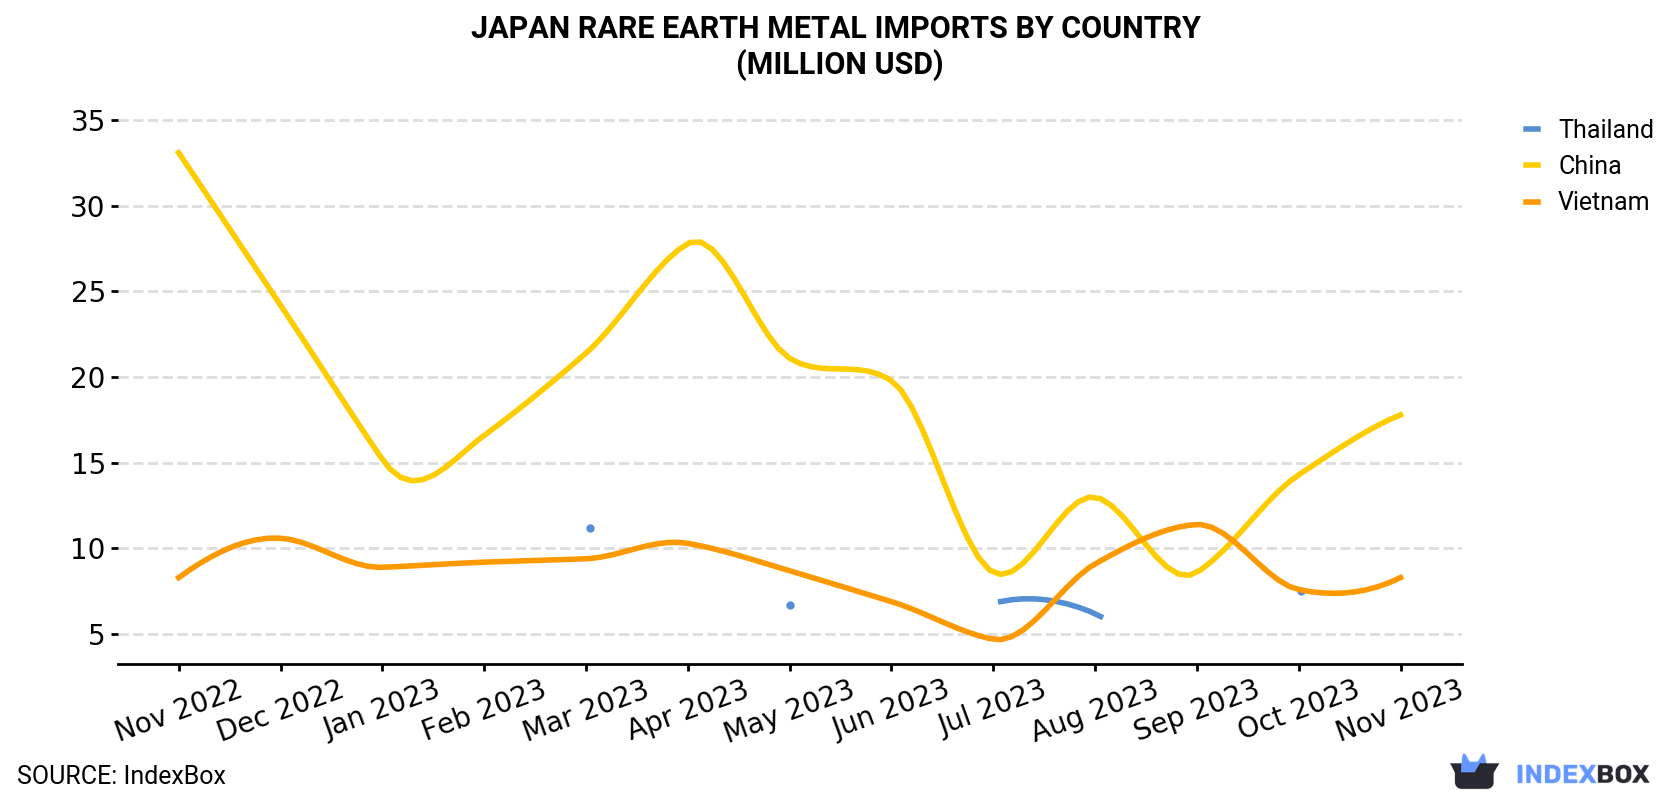 Japan Rare Earth Metal Imports By Country (Million USD)